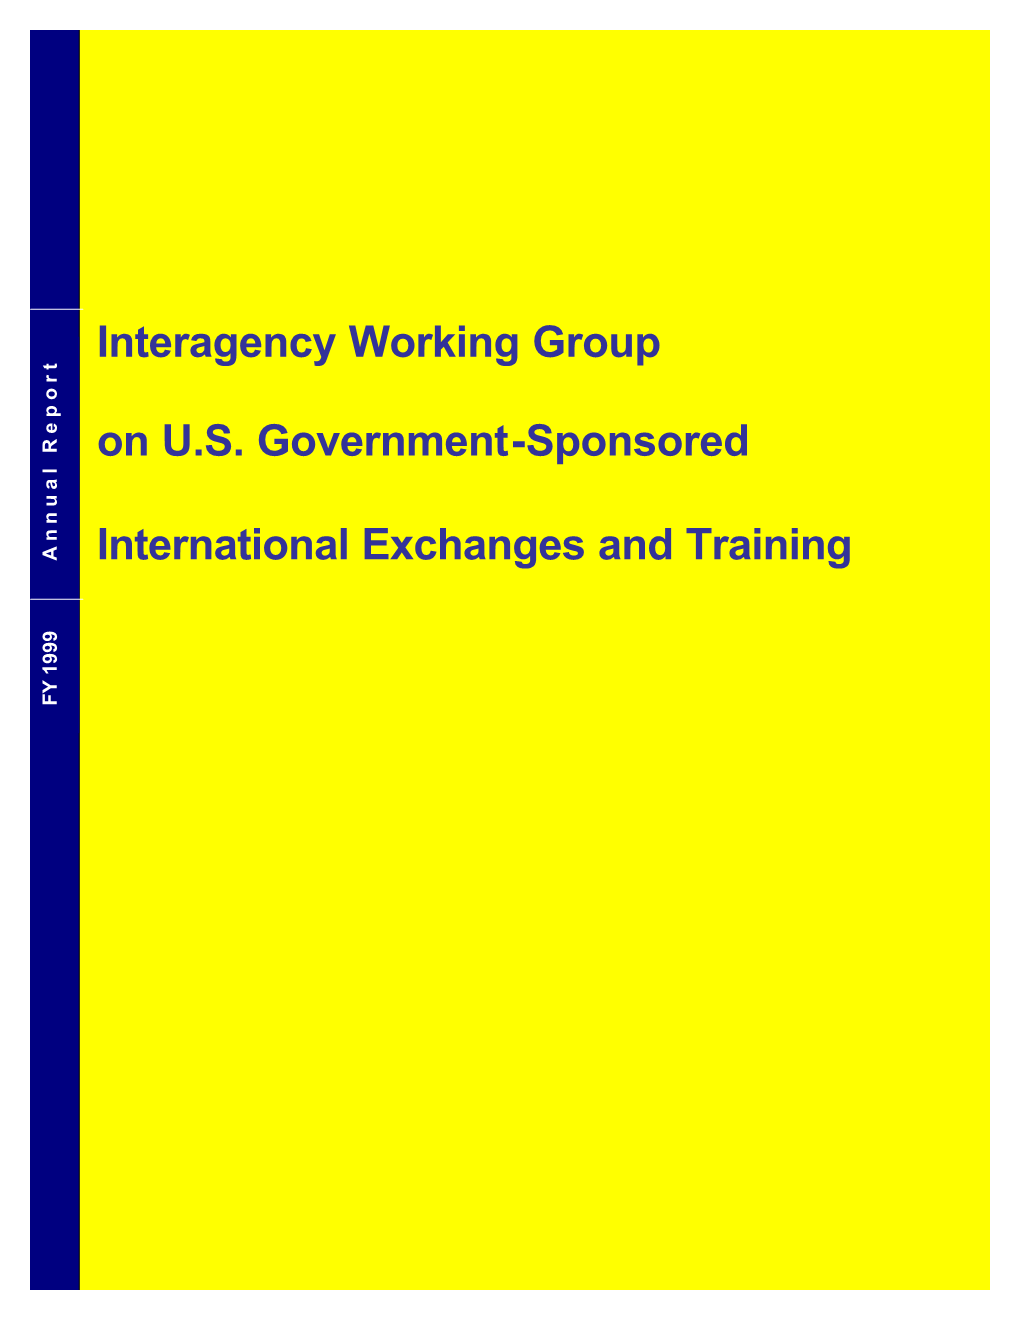 FY 1999 Annual Report, the IAWG Conducted Three Country Field Studies to Georgia, Morocco, and Thailand